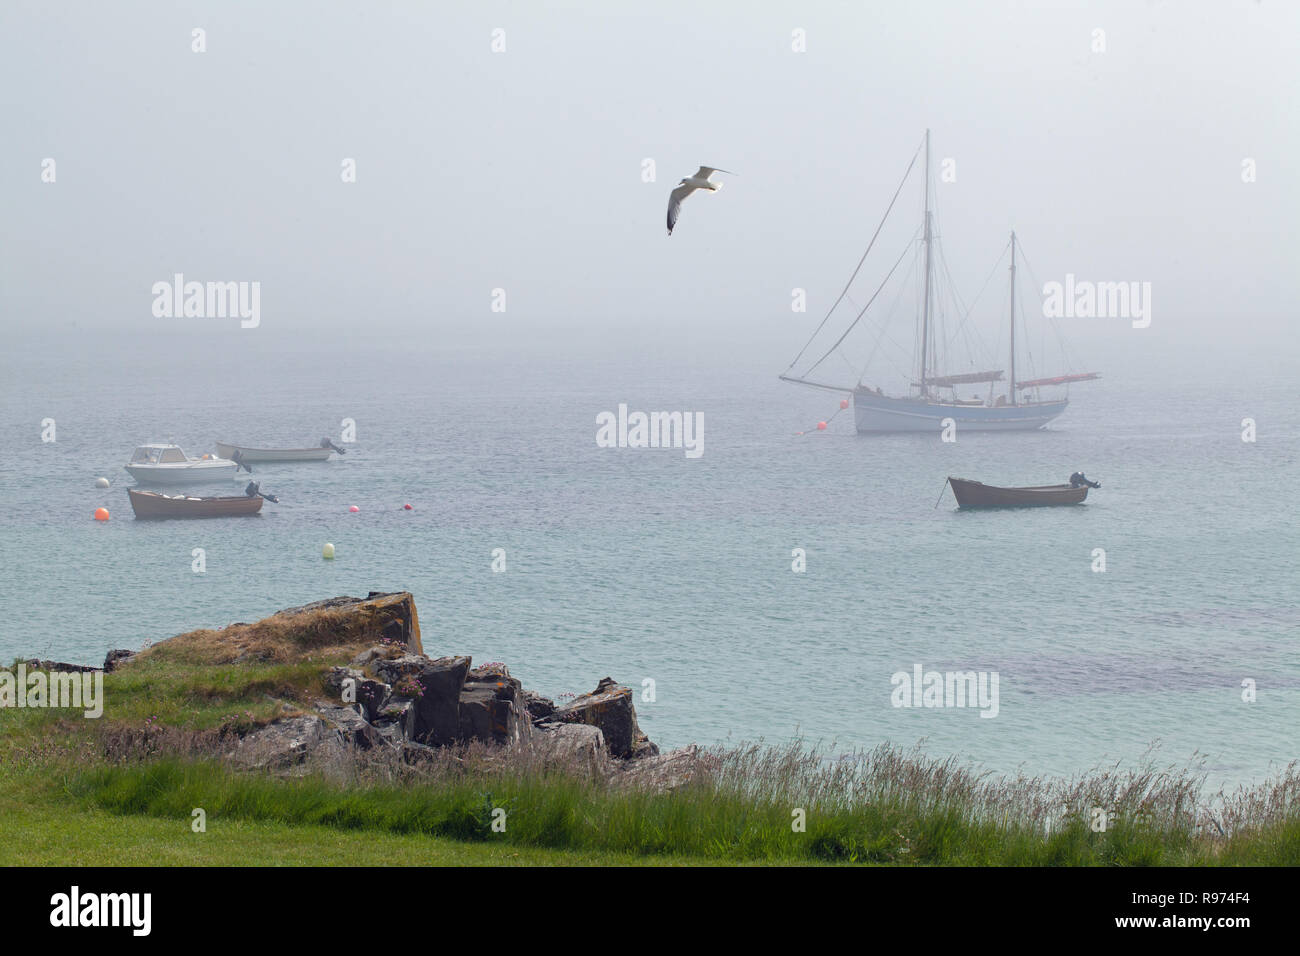 Anchored Boats.  View from The Village, St. Ronan’s Bay, Isle of Iona, across The Sound, towards Fionnphort, Mull, horizon obscured by early morning mist. Stock Photo